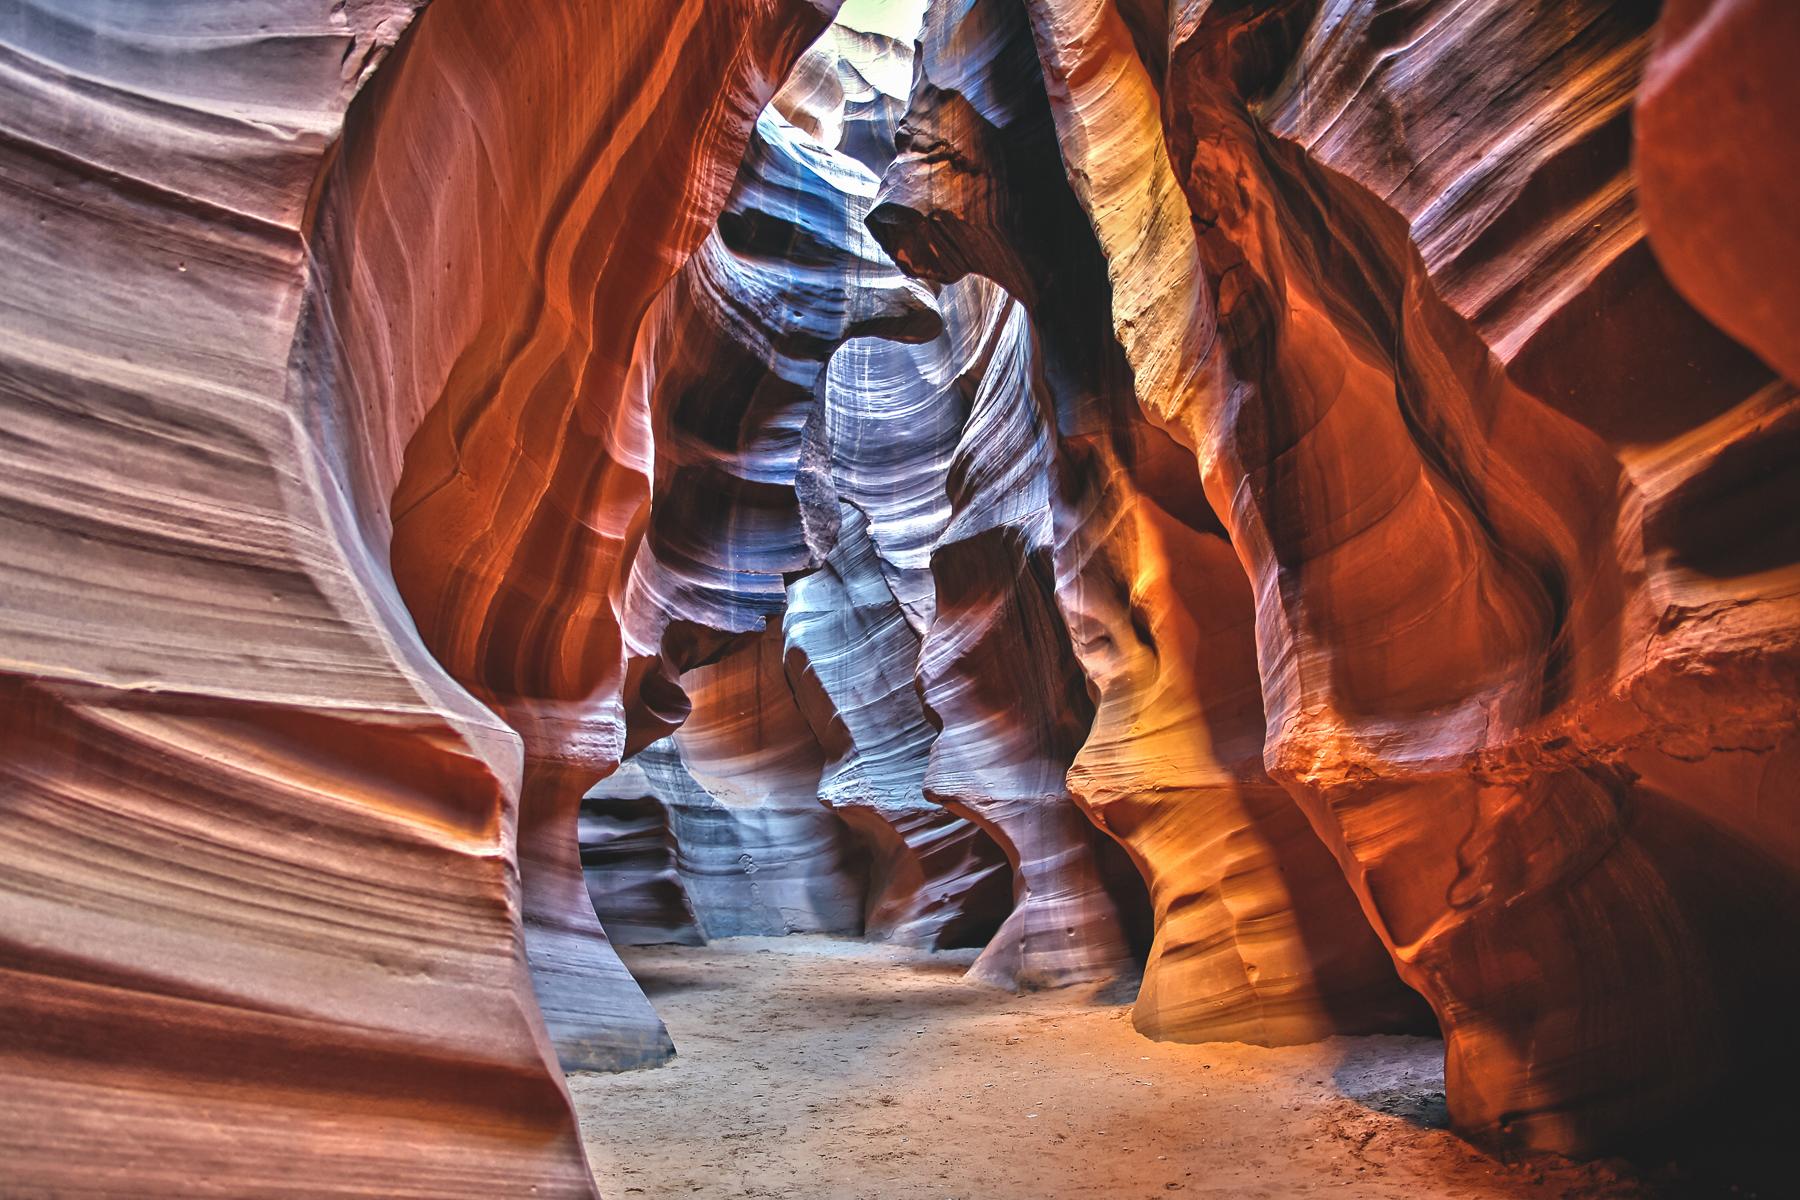 These Incredible Slot Canyons in the American Southwest Are Worth Exploring